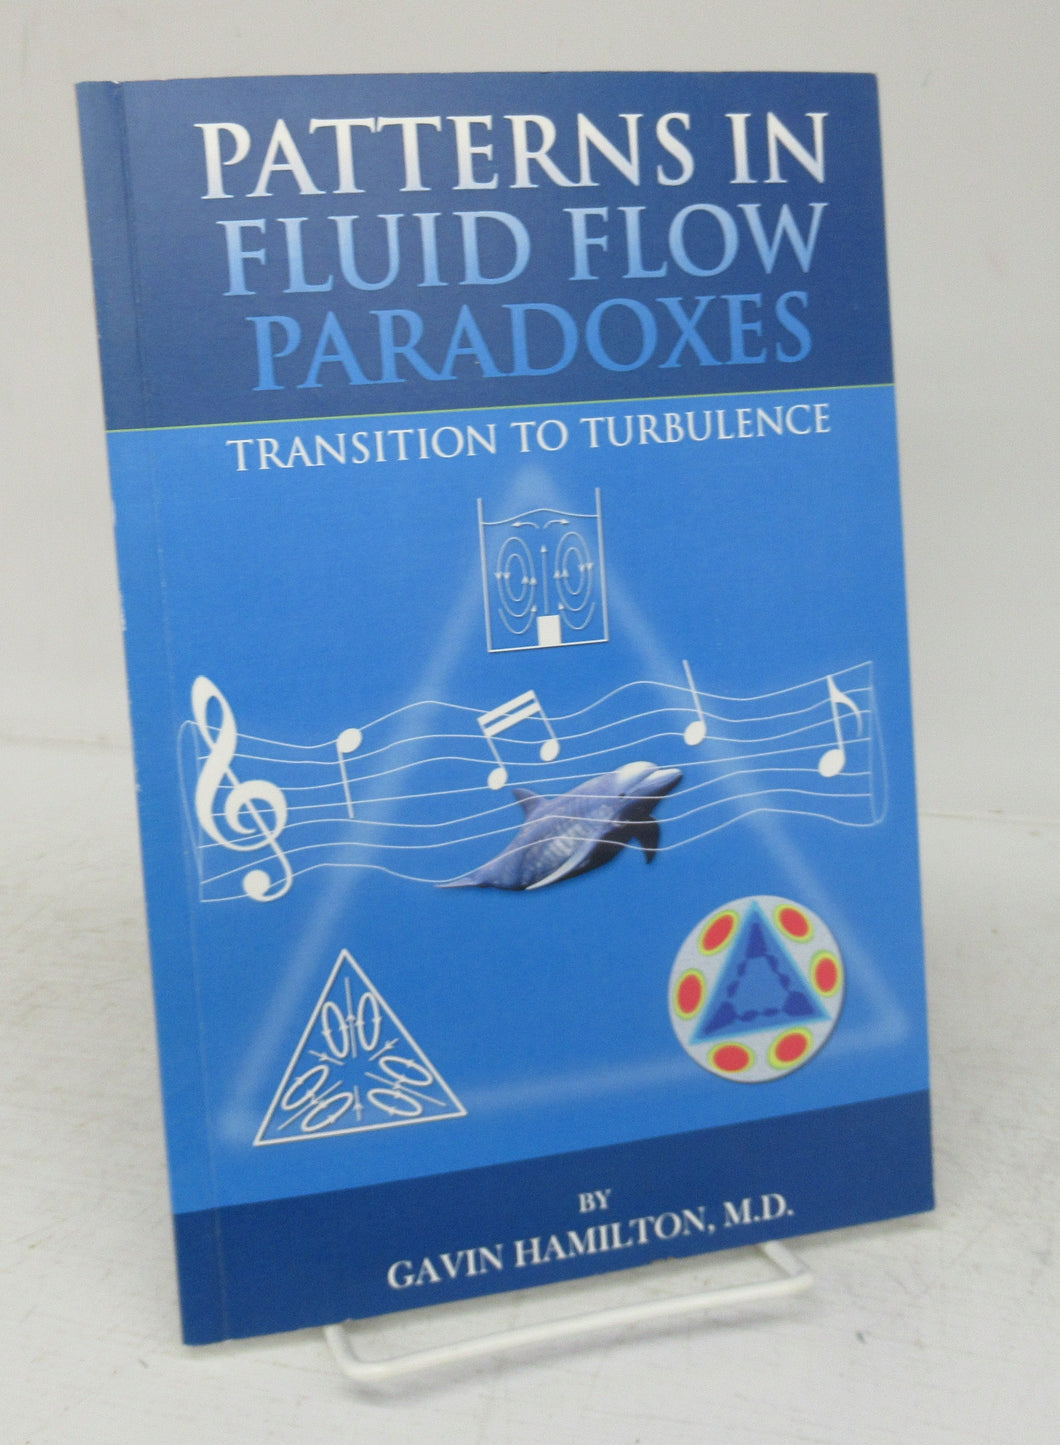 Patterns in Fluid Flow Paradoxes: Transition to Turbulence